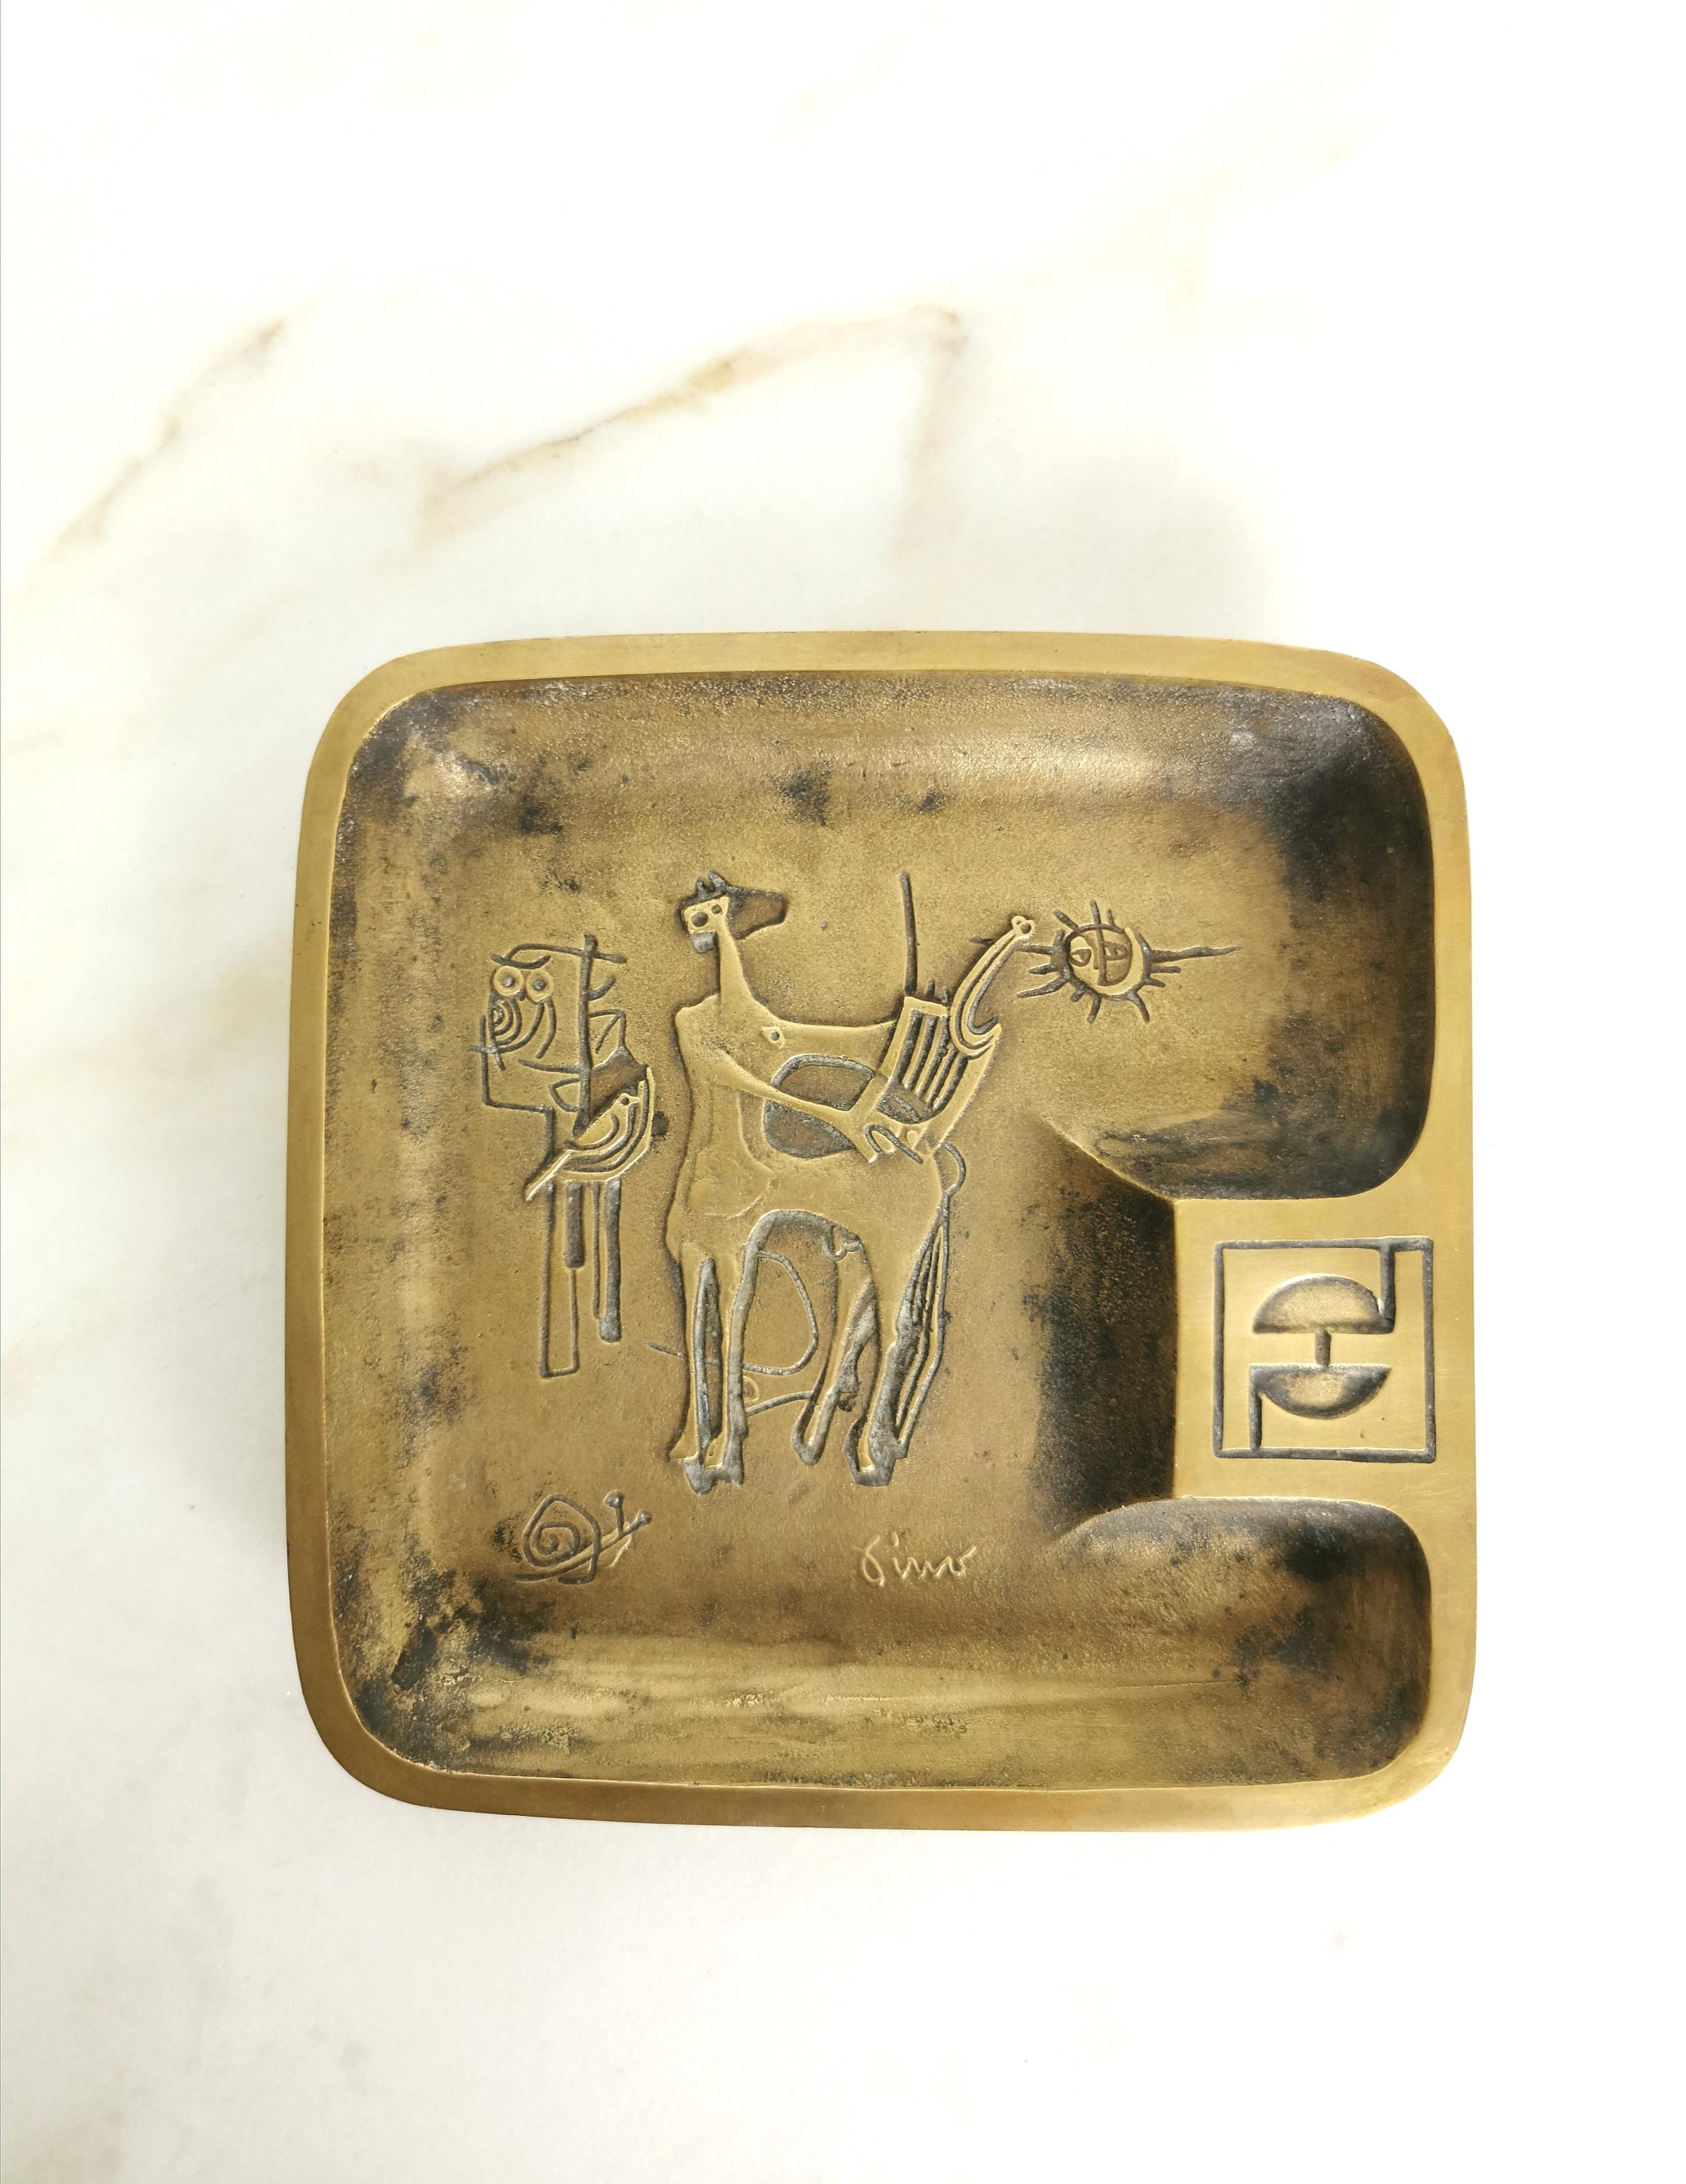 Rare and particular pocket emptier produced in the 60s by the Italian company Fantoni-Casa ufficio-Osoppo. The square-shaped pocket emptier with rounded corners was made of brass with decoration inside by the sculptor Joan Mirò.